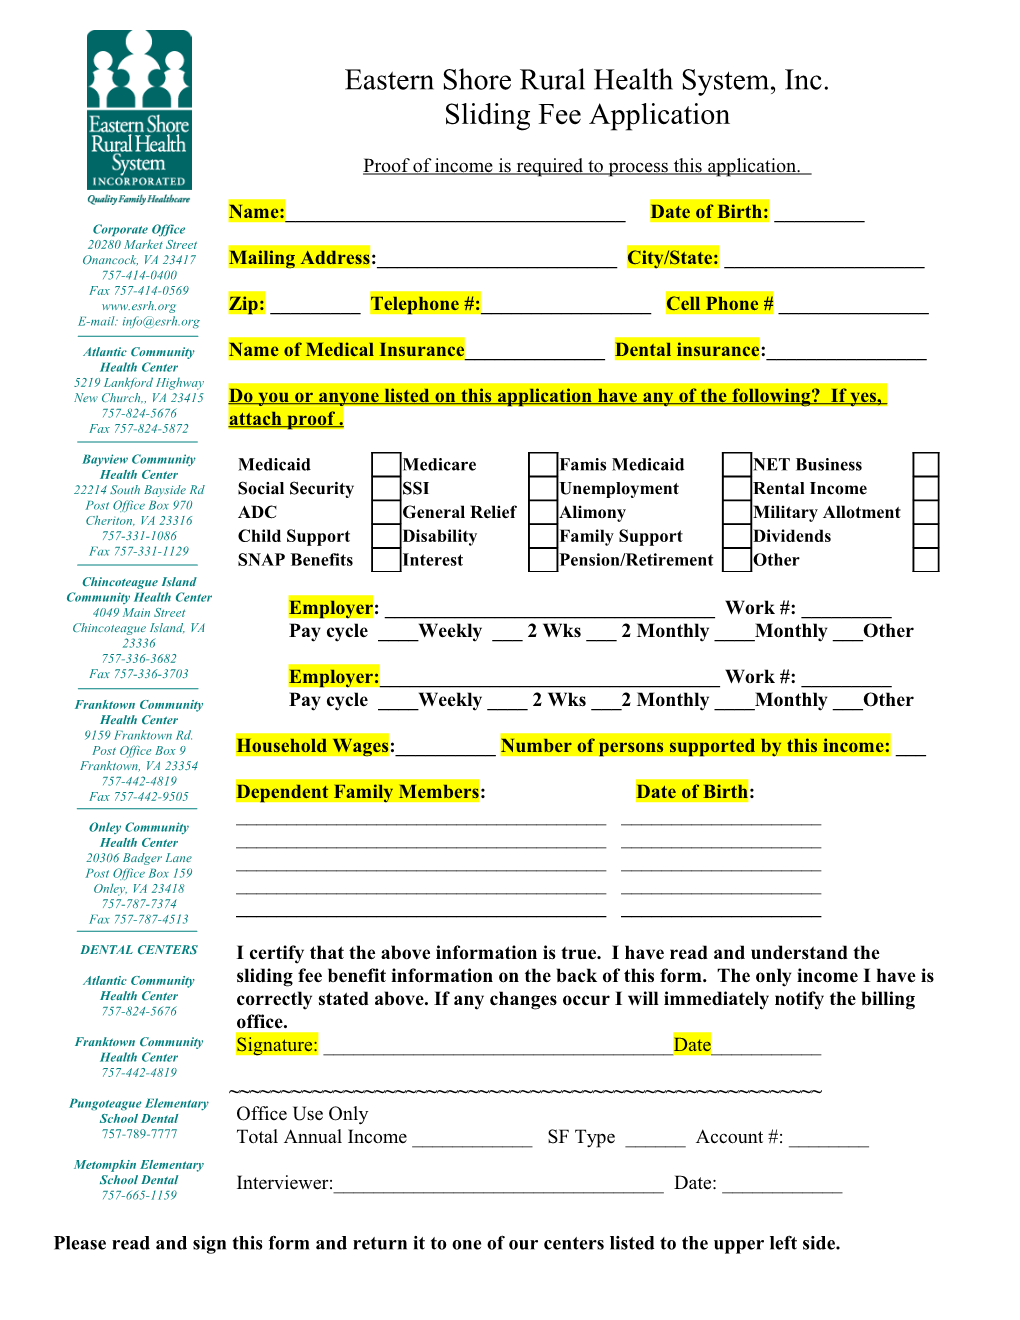 Please Read and Sign This Form and Return It to One of Our Centers Listed to the Upper